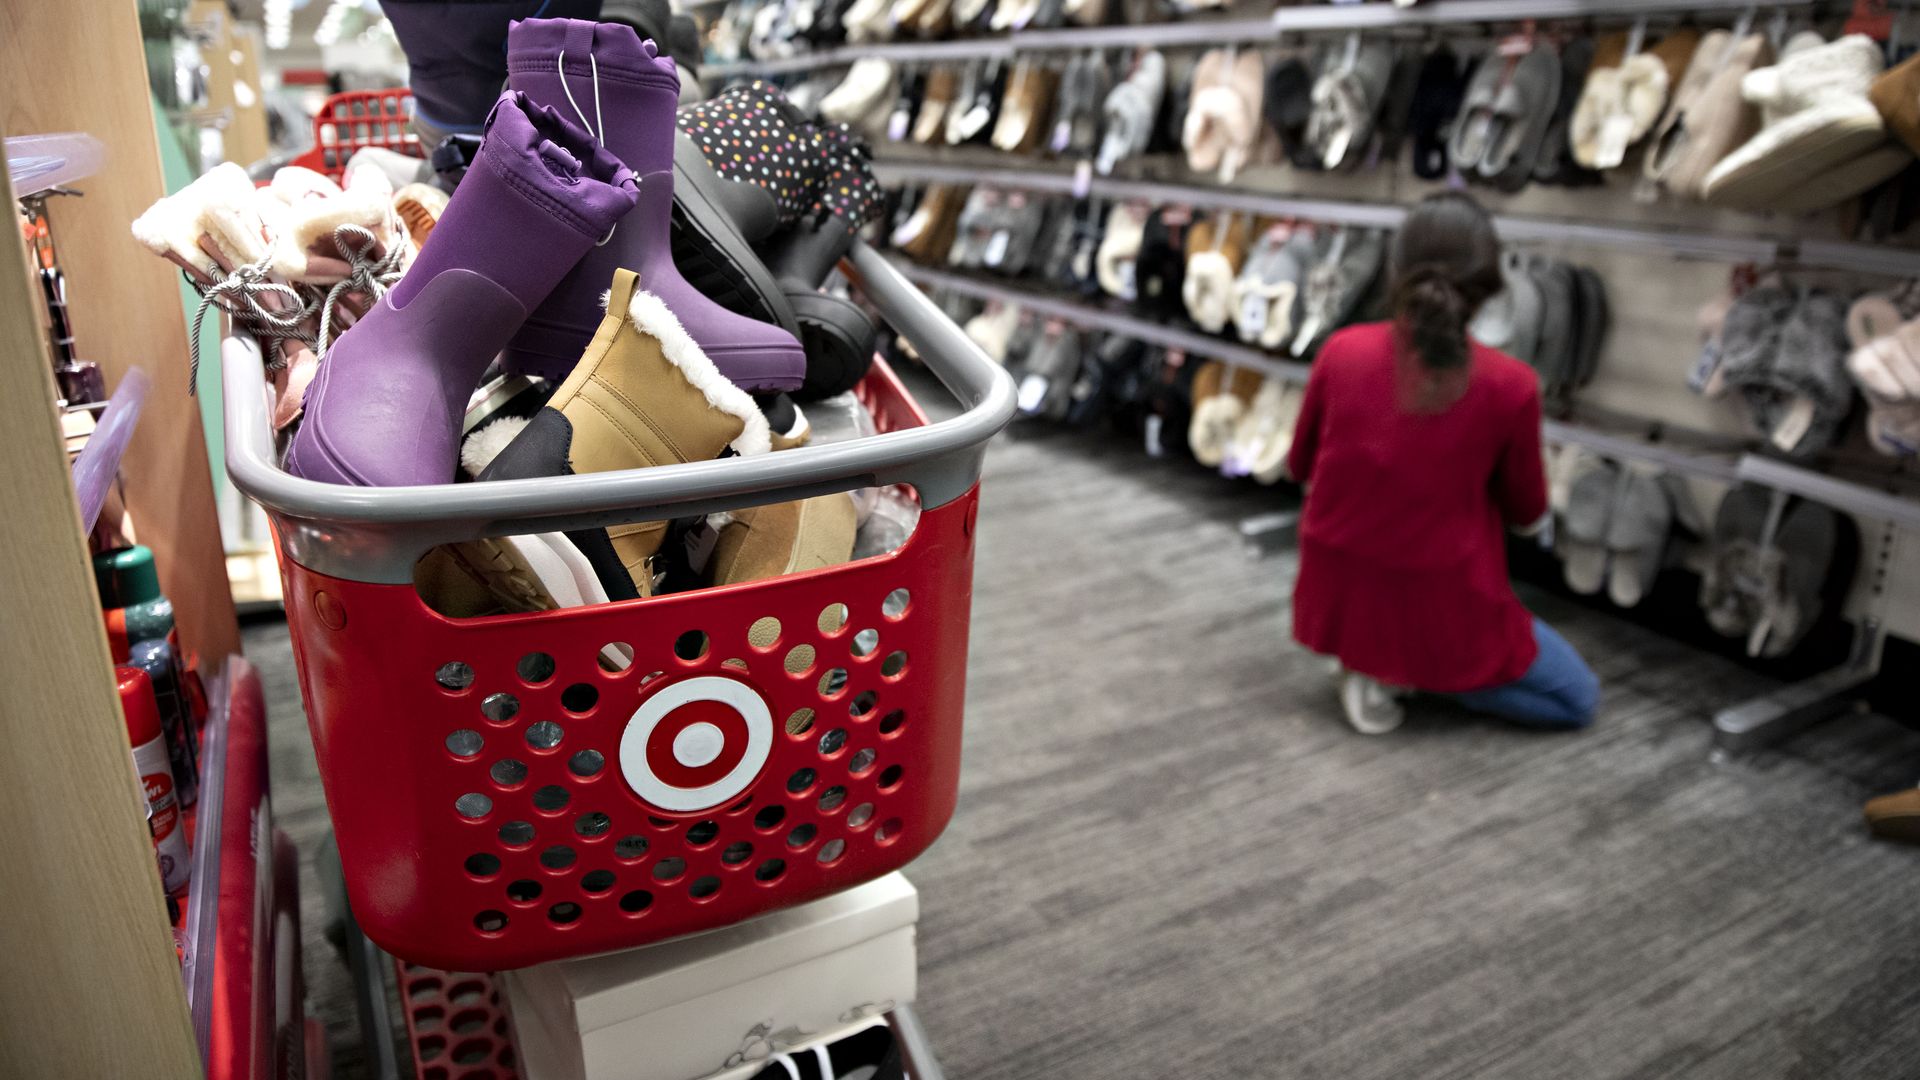 Photo of a Target employee crouching in an aisle while a cart filled with shoes is nearby